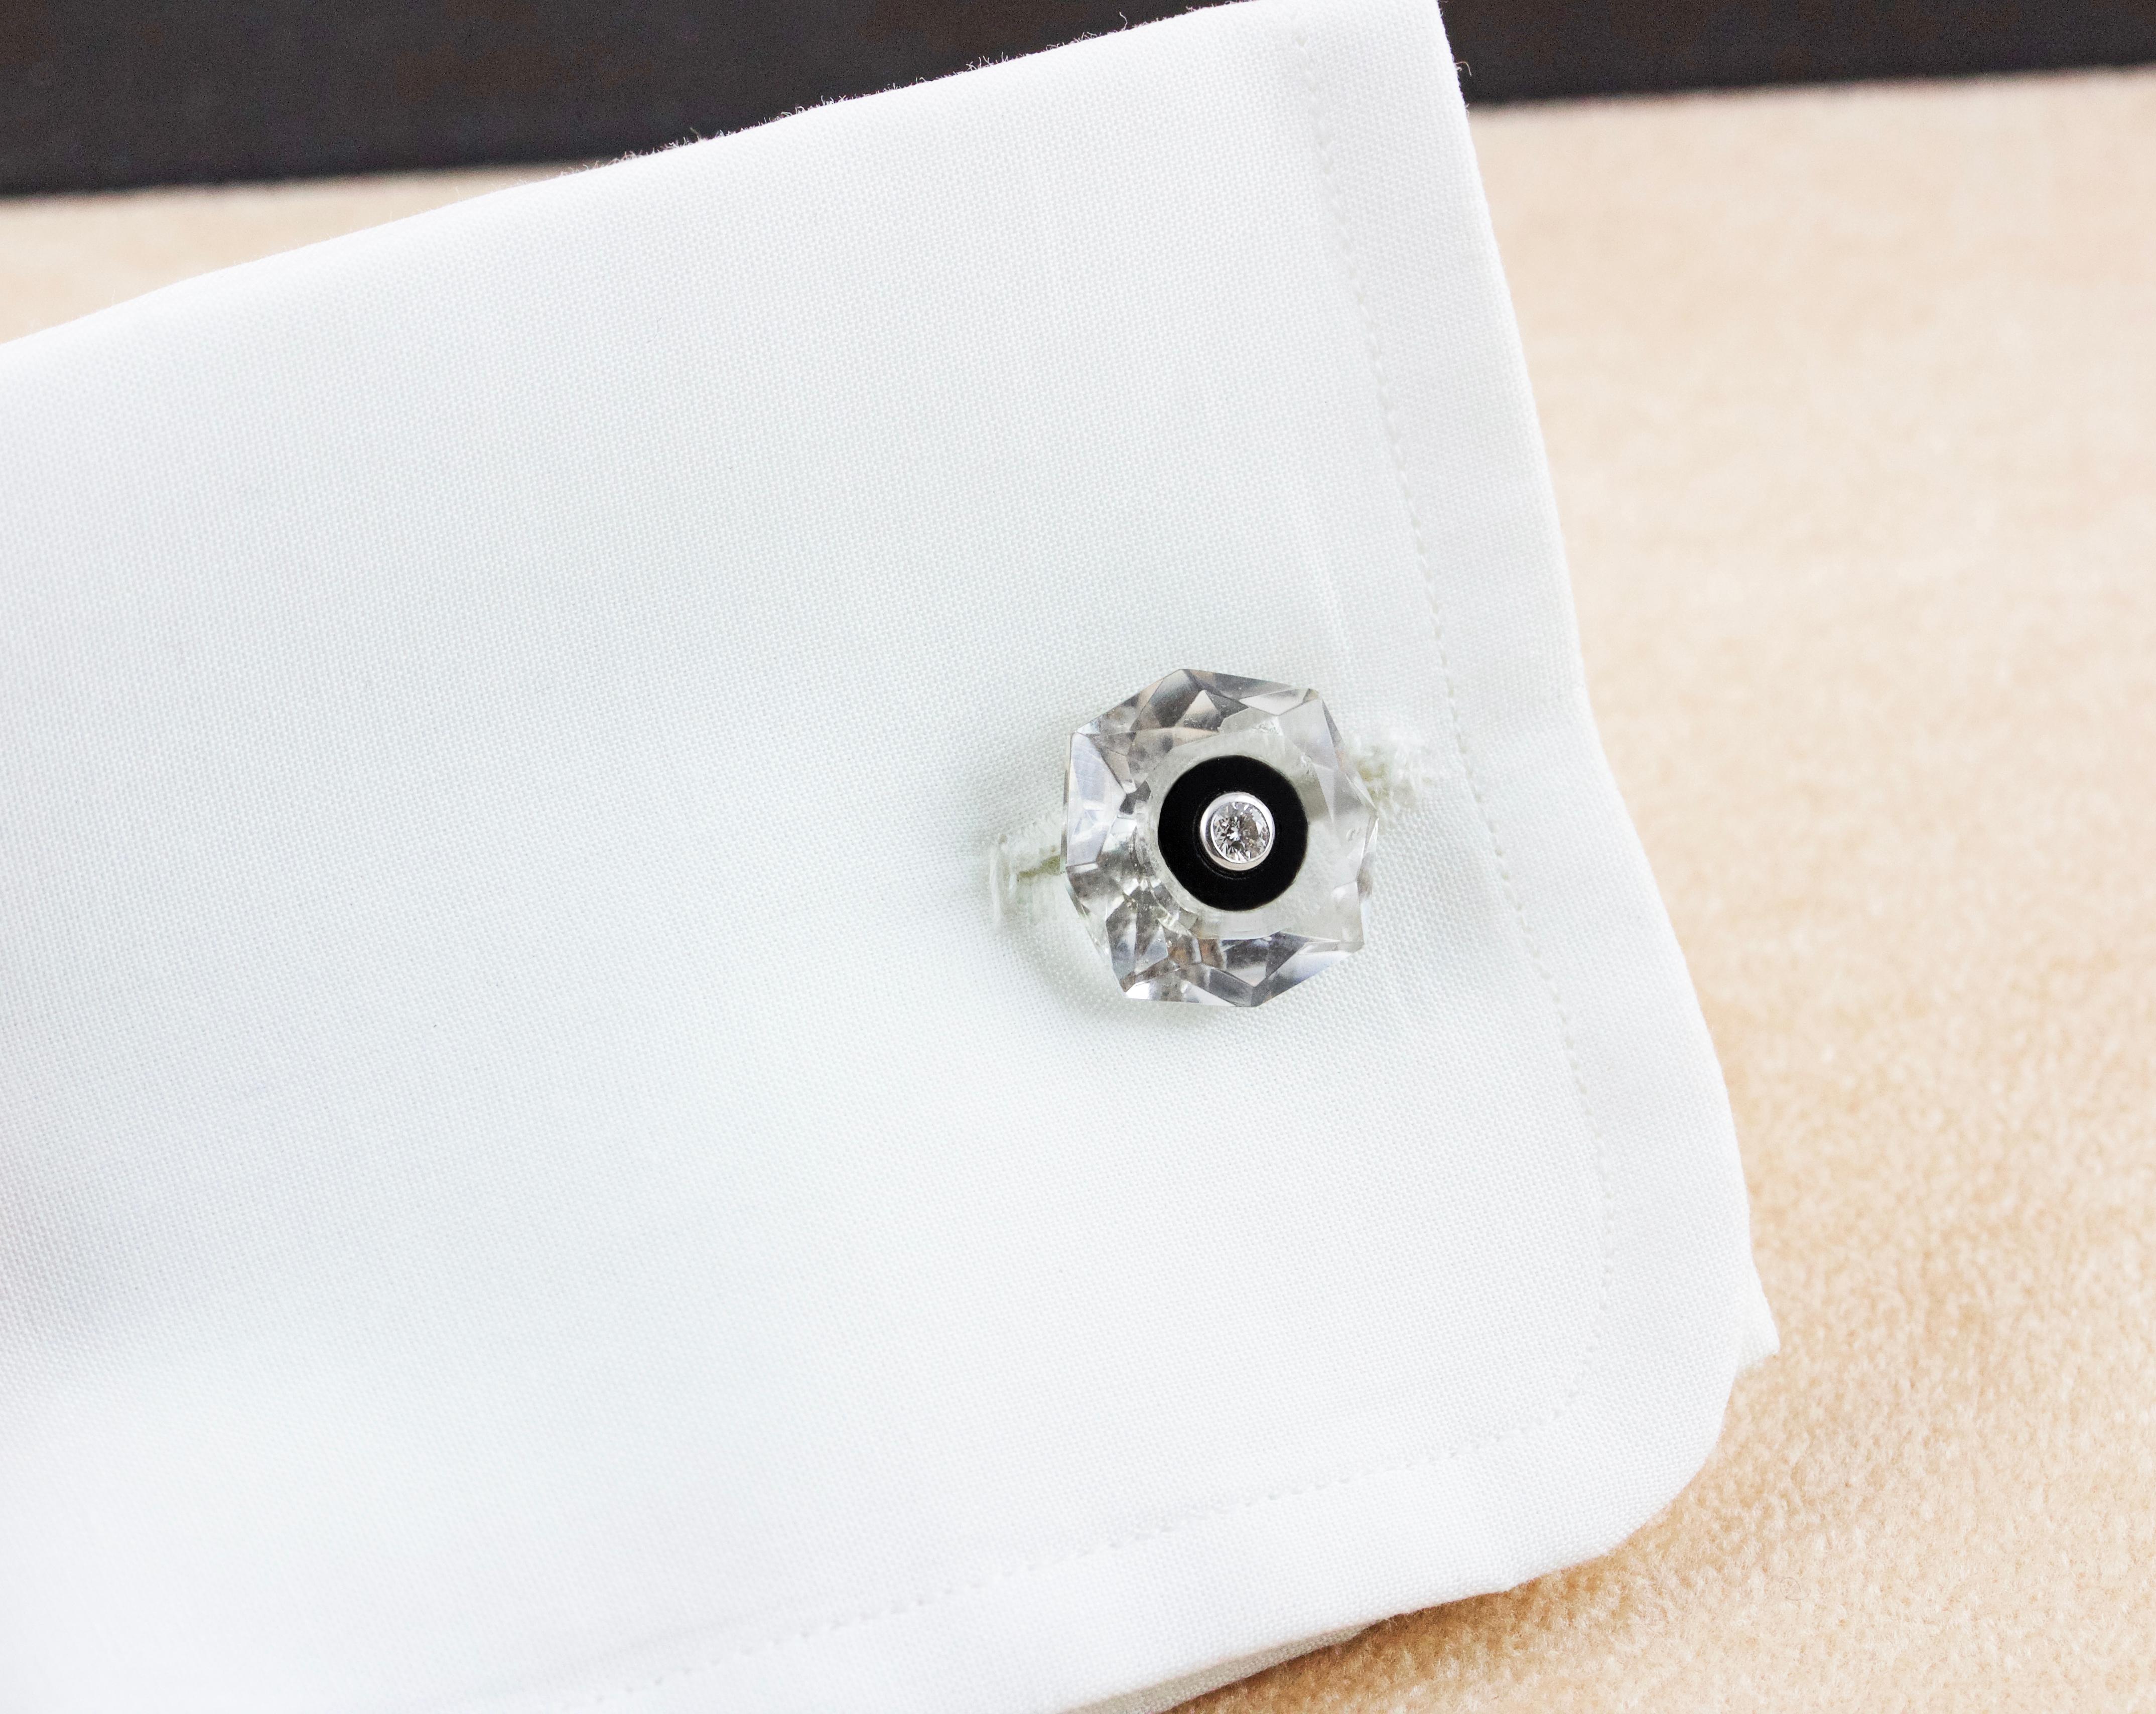 These striking cufflinks are made of Rock Crystal, whose shimmering transparency highlights the texture of its front face and toggle, both shaped as a multifaceted octagon. Each element is adorned in the center with a decoration made of onyx and